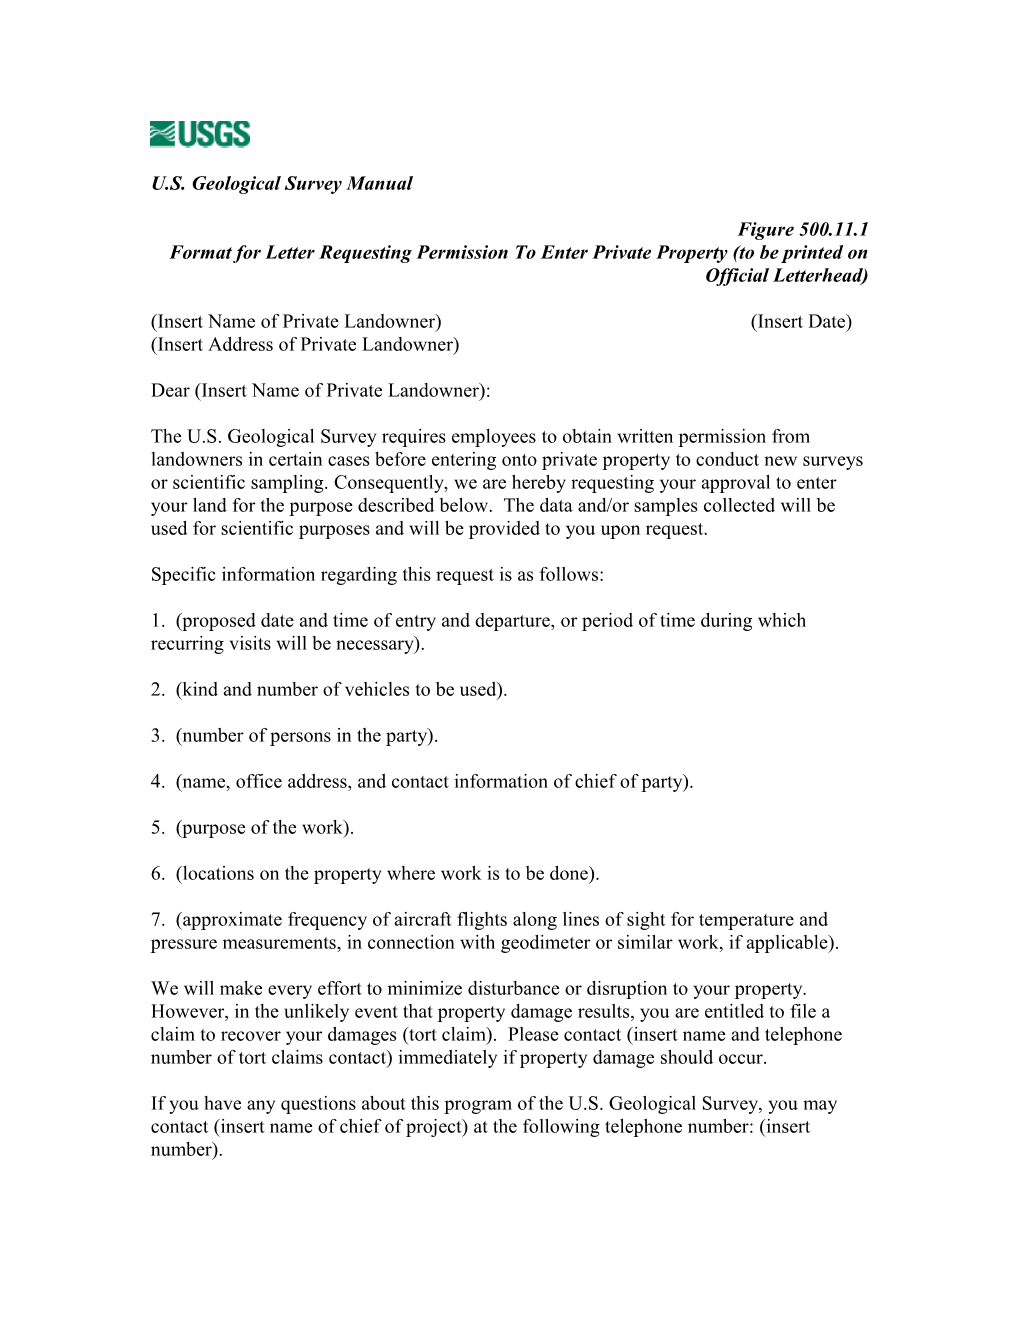 Format for Letter Requesting Permission to Enter Private Property (To Be Printed on Official